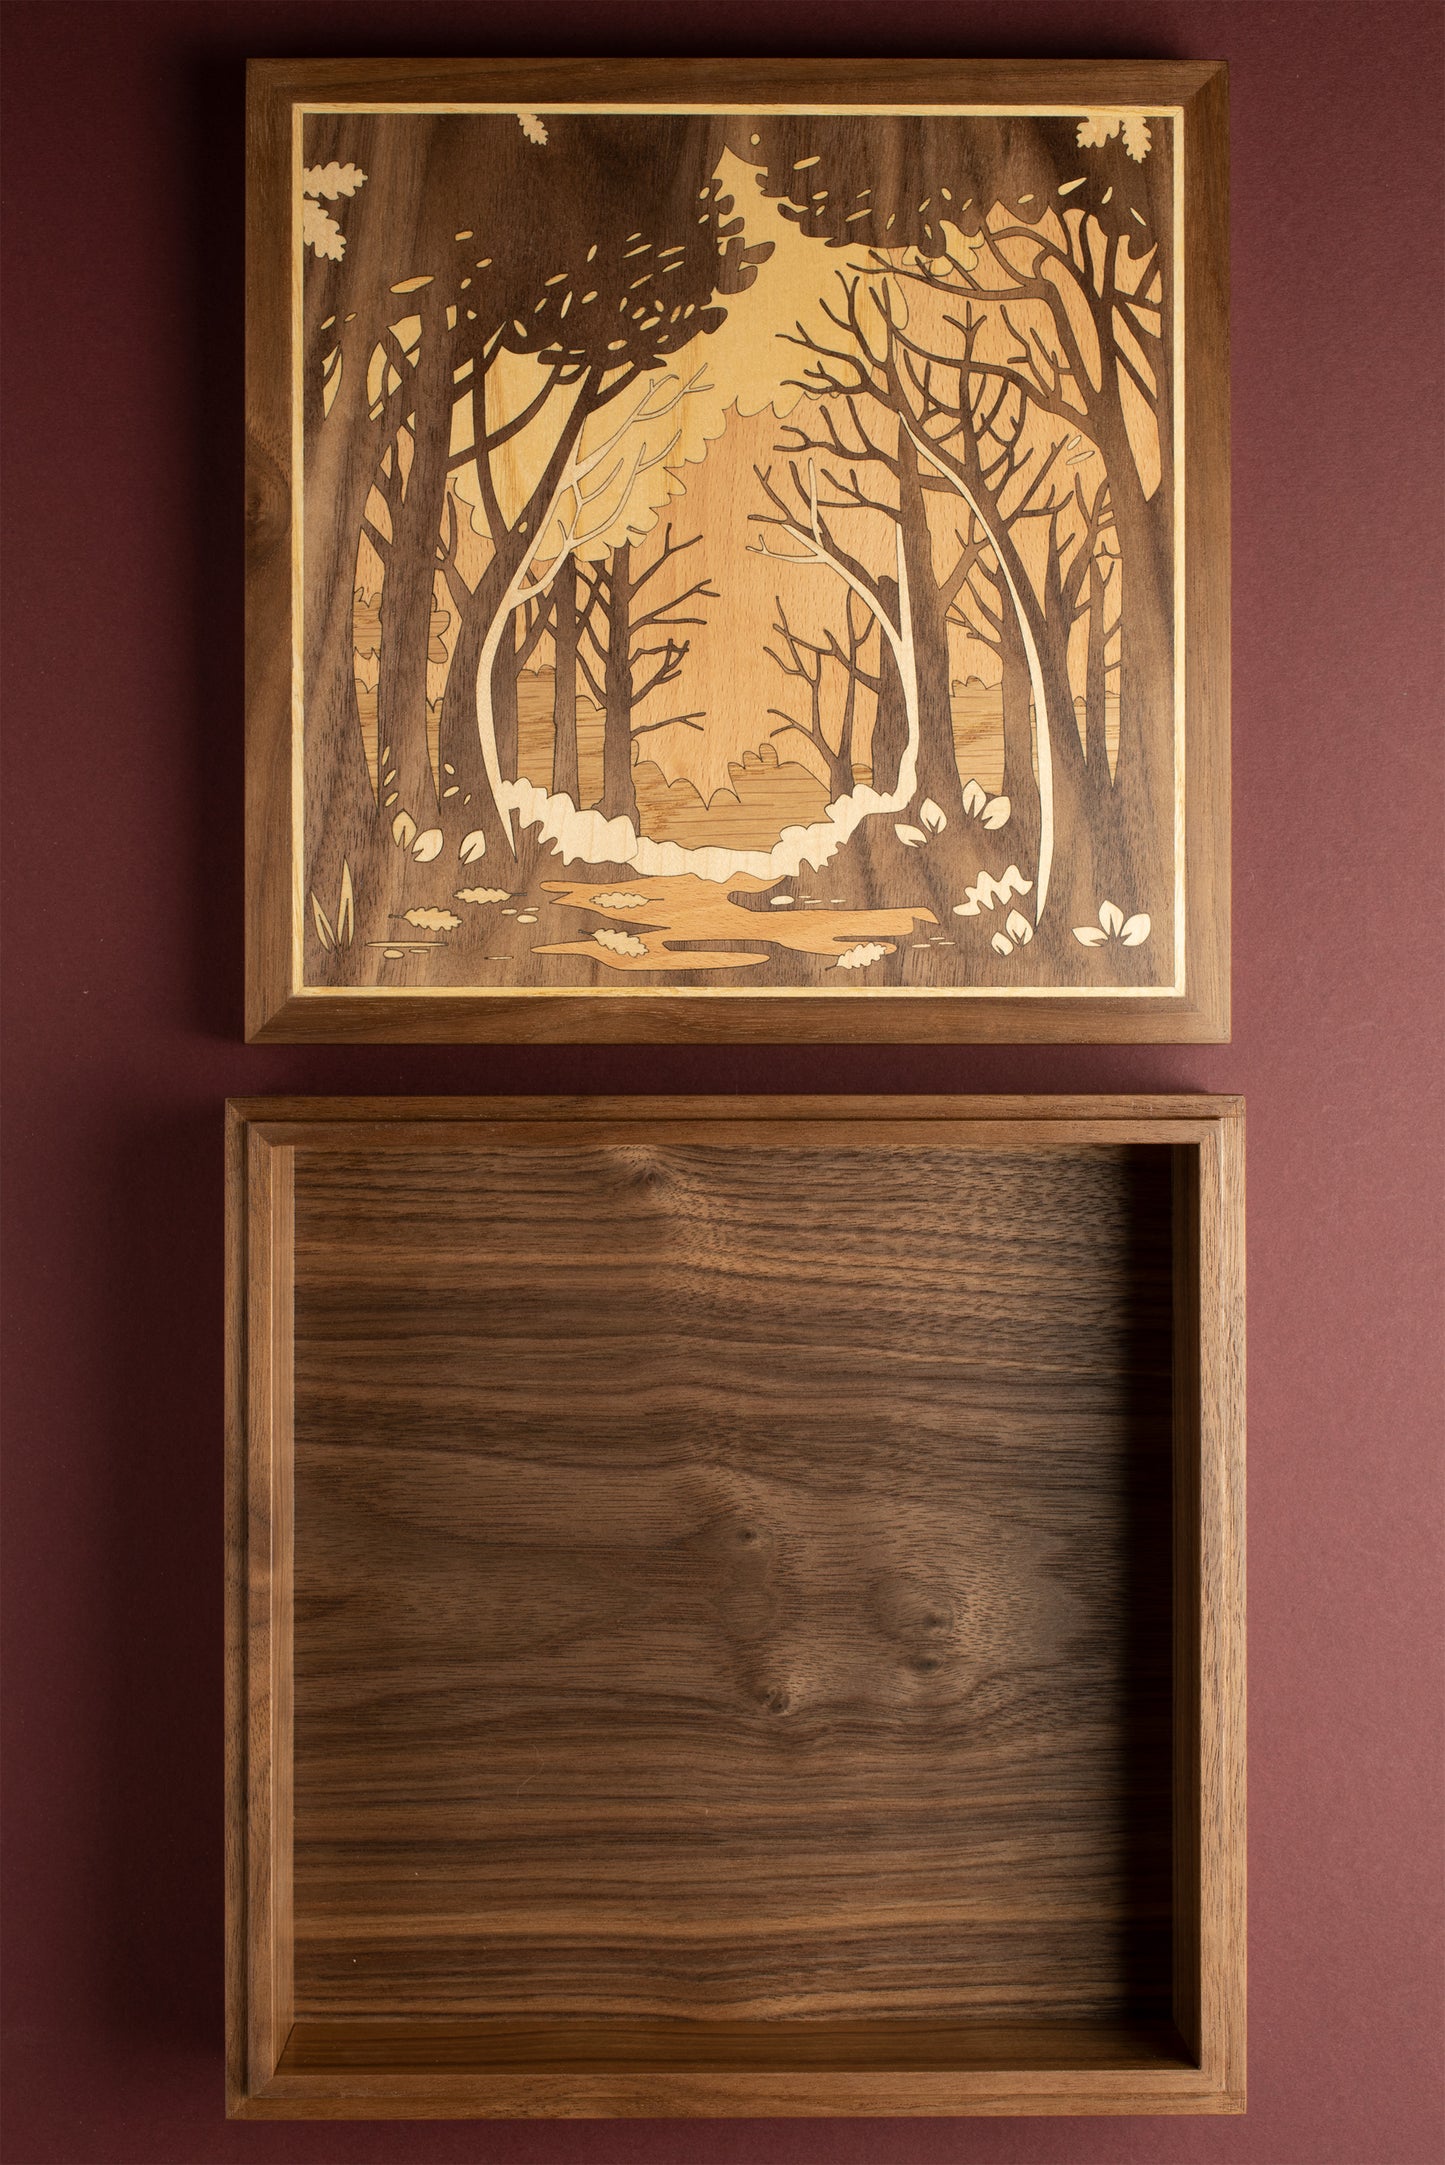 Marquetry Boxes made to order